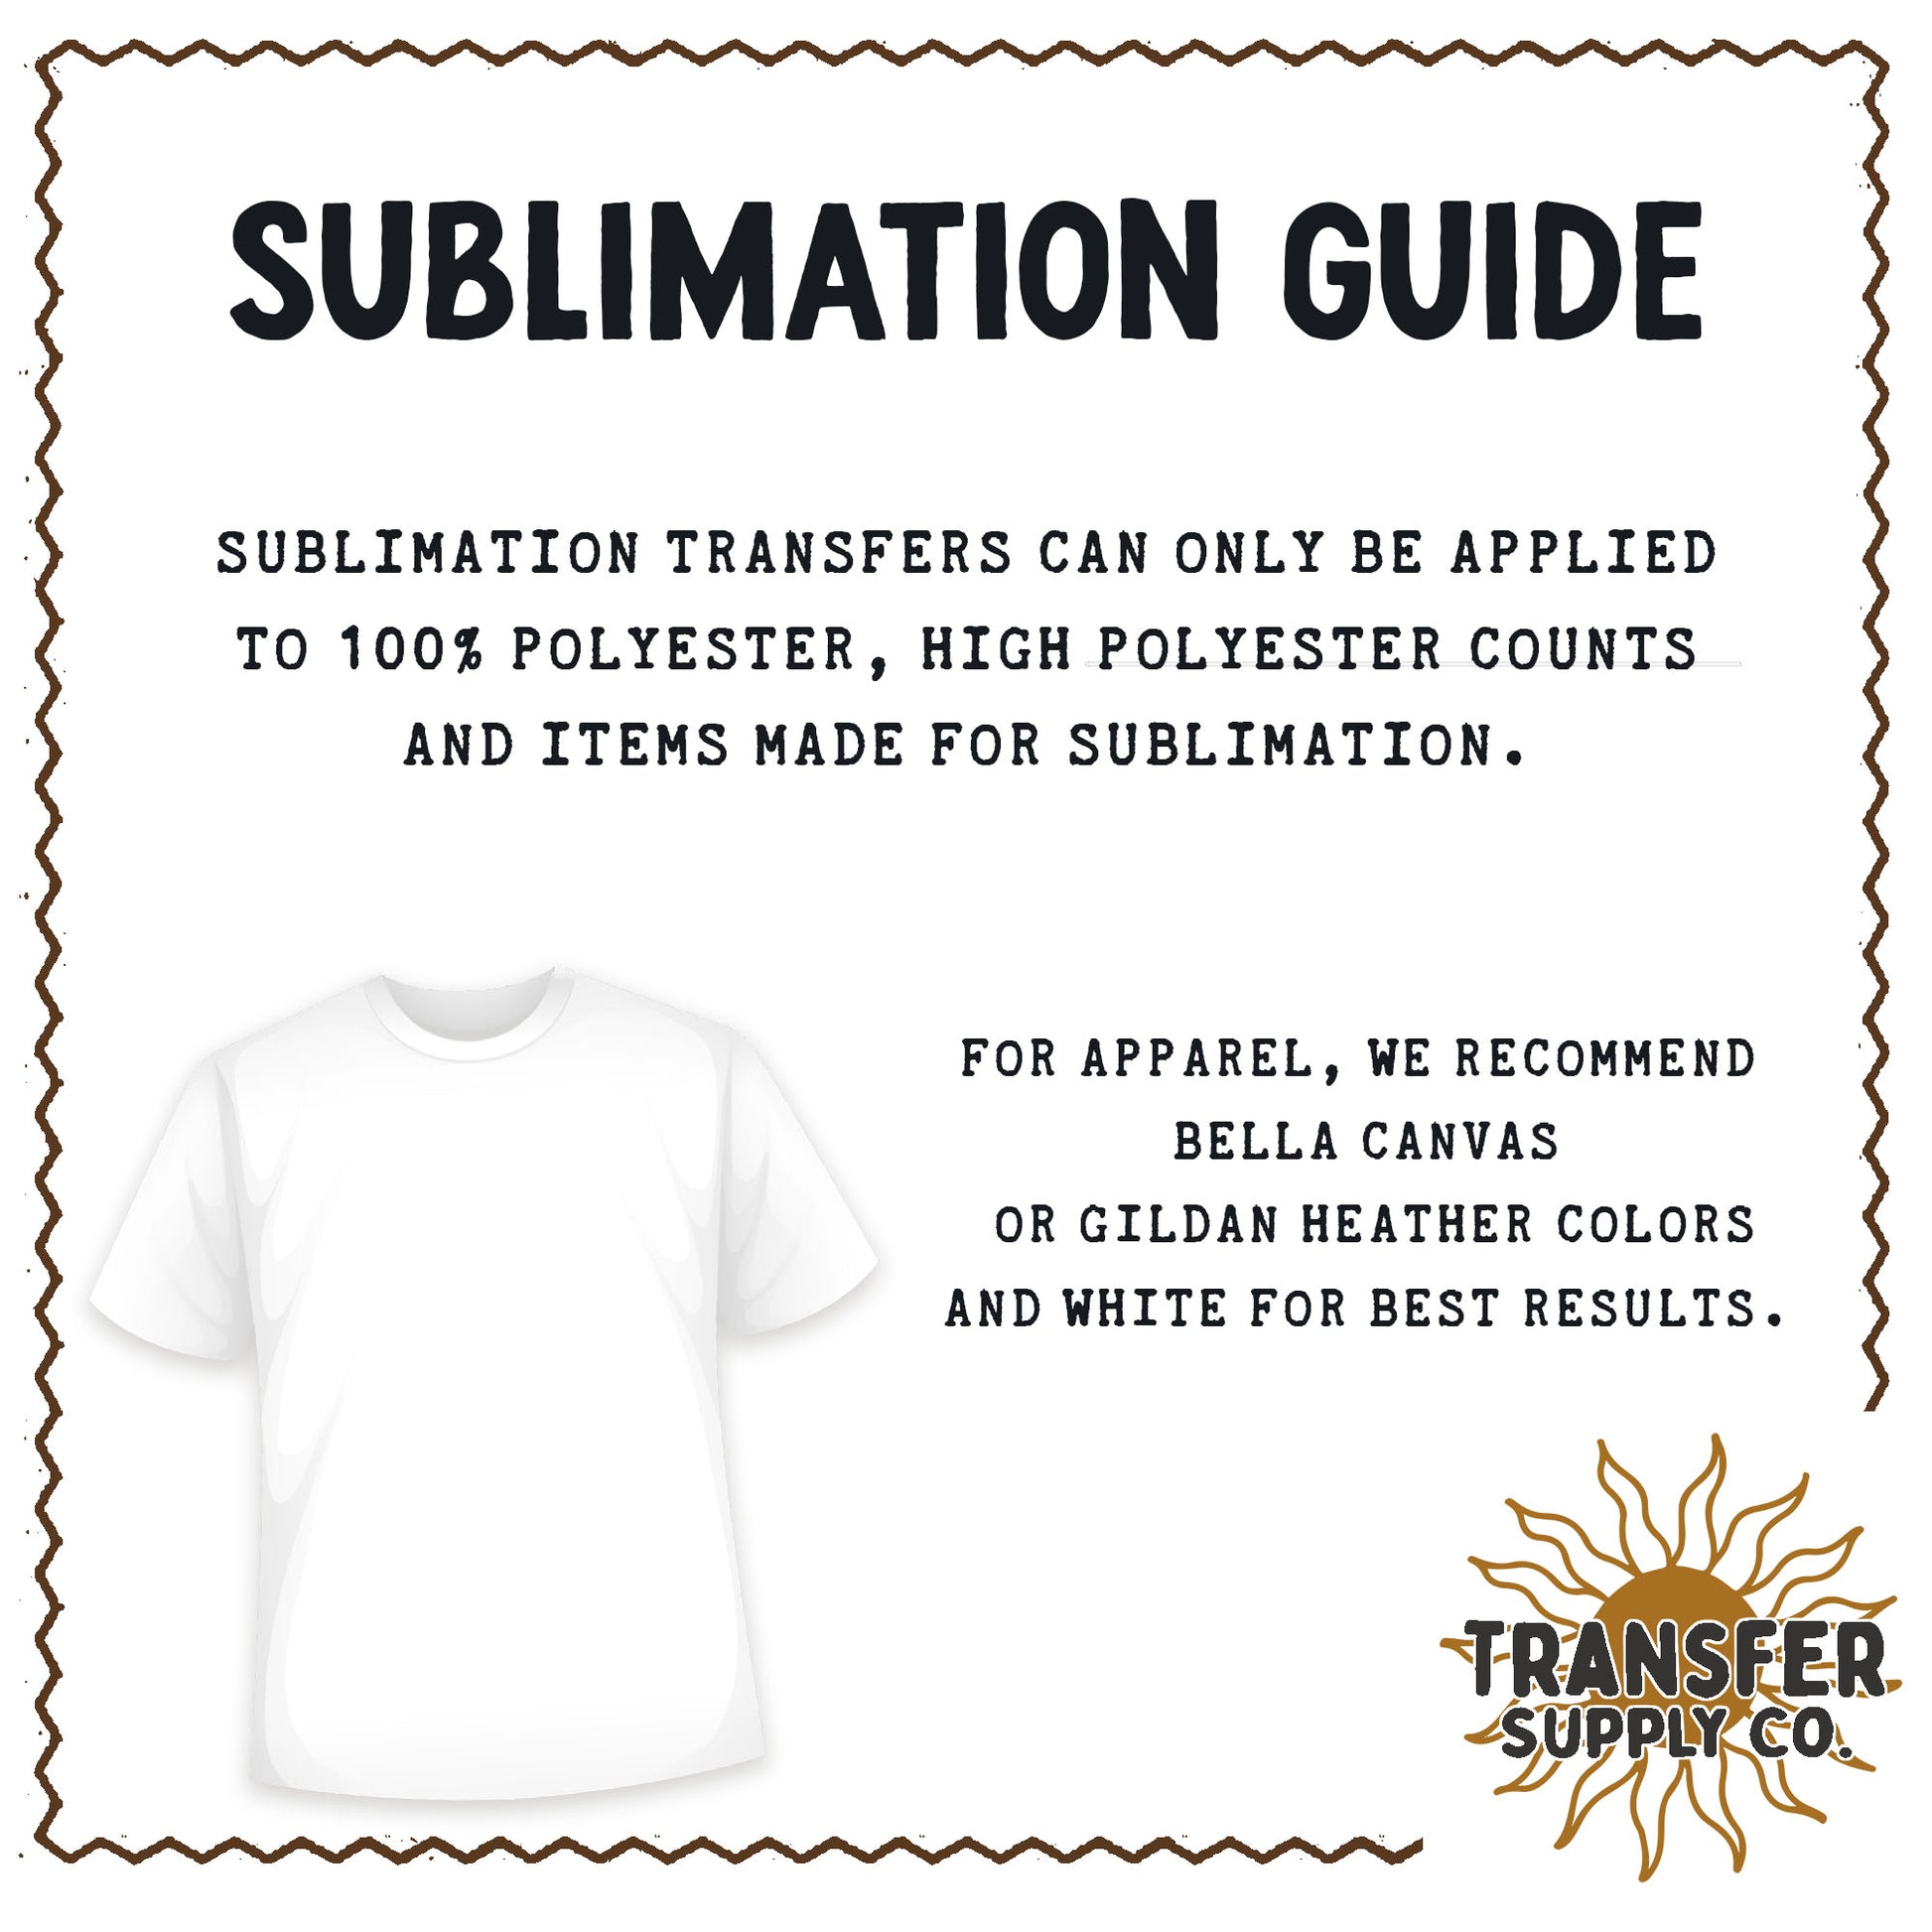 a white t - shirt with the text sublimation guide